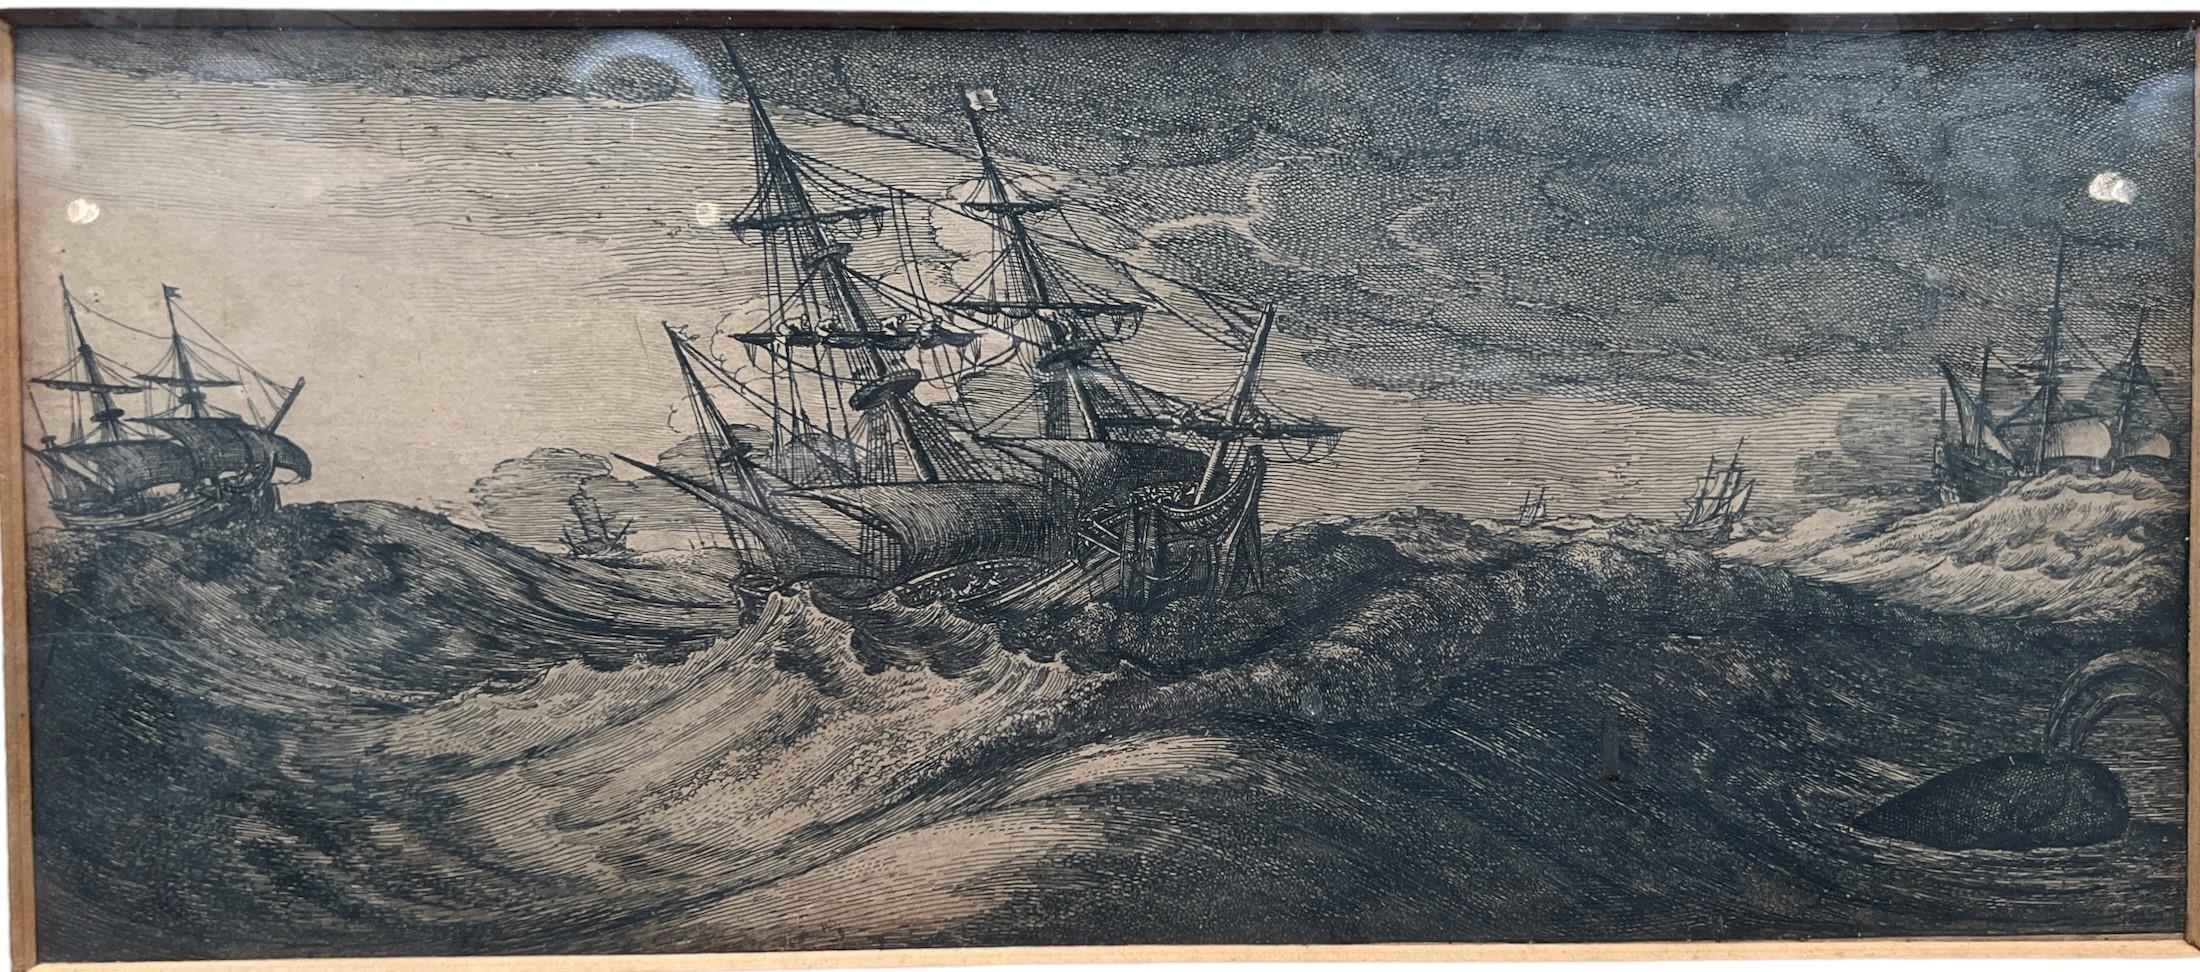 WENCESLAUS HOLLAR, BOHEMIAN, 1607 - 1677, A SET OF THREE 17TH CENTURY ETCHINGS Seascape with - Image 4 of 10